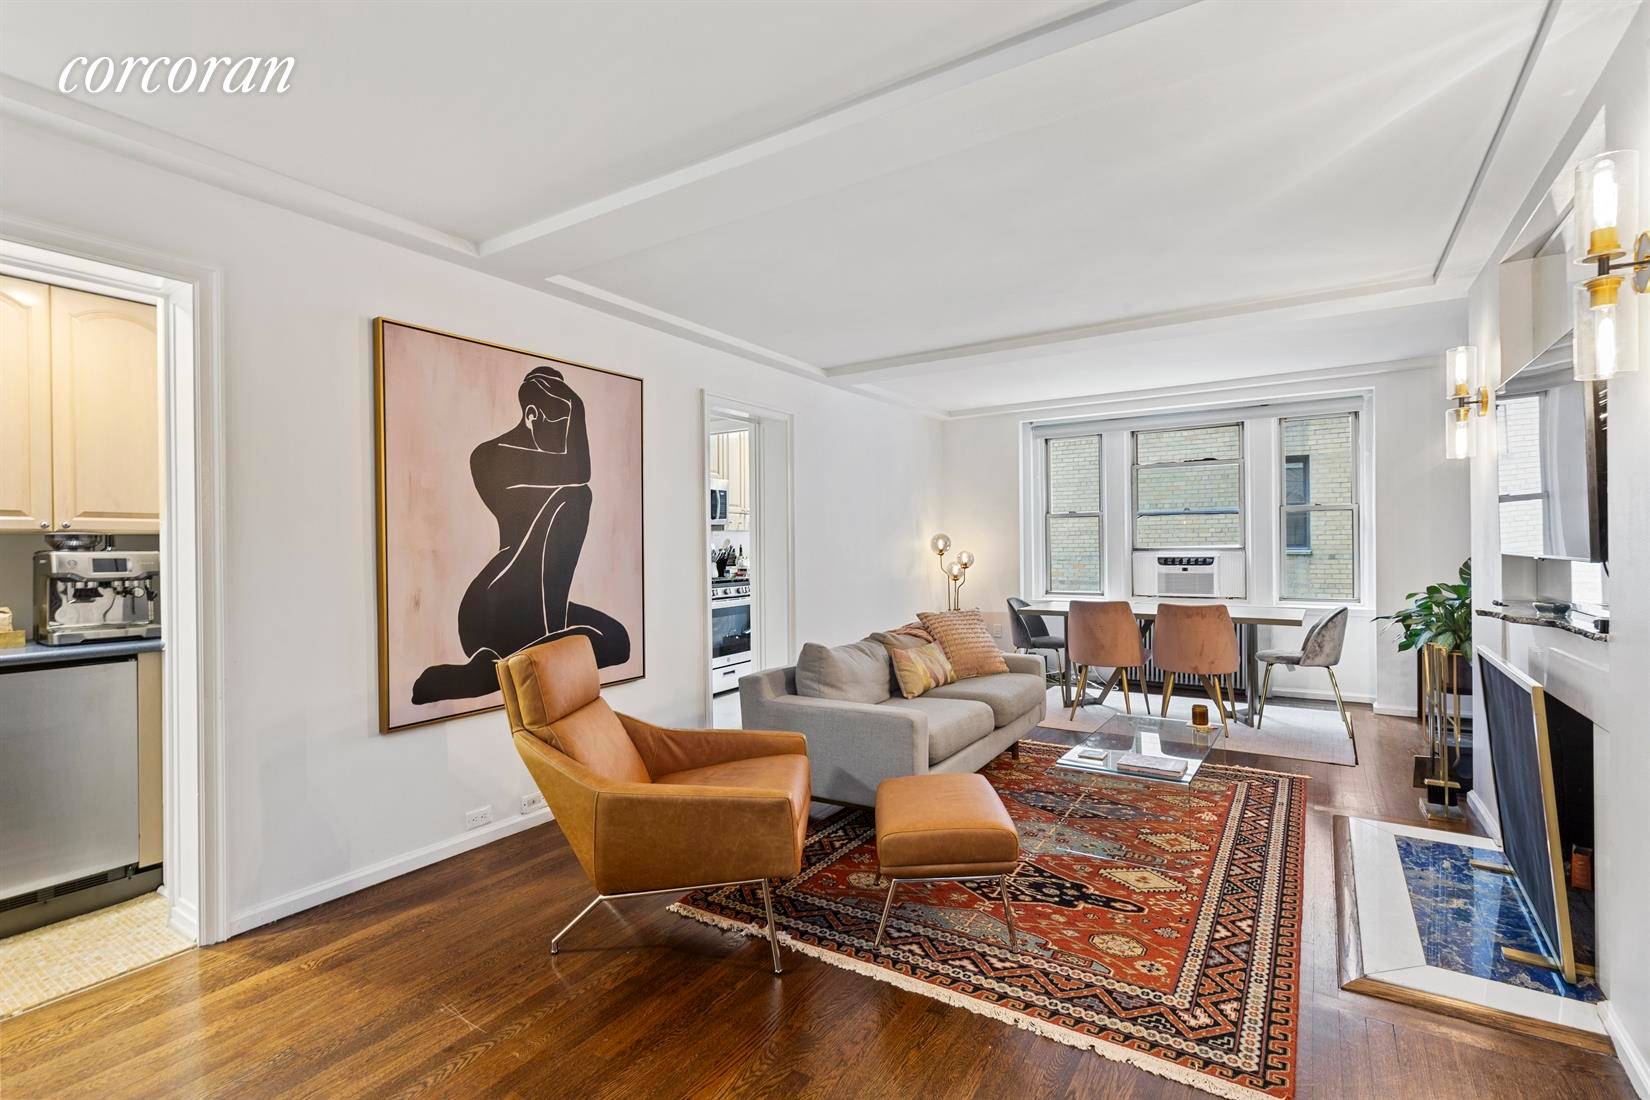 Elegance and classic pre war architecture abound in this stunning oversized one bedroom Condominium home at 59 West 12th Street, 4G.